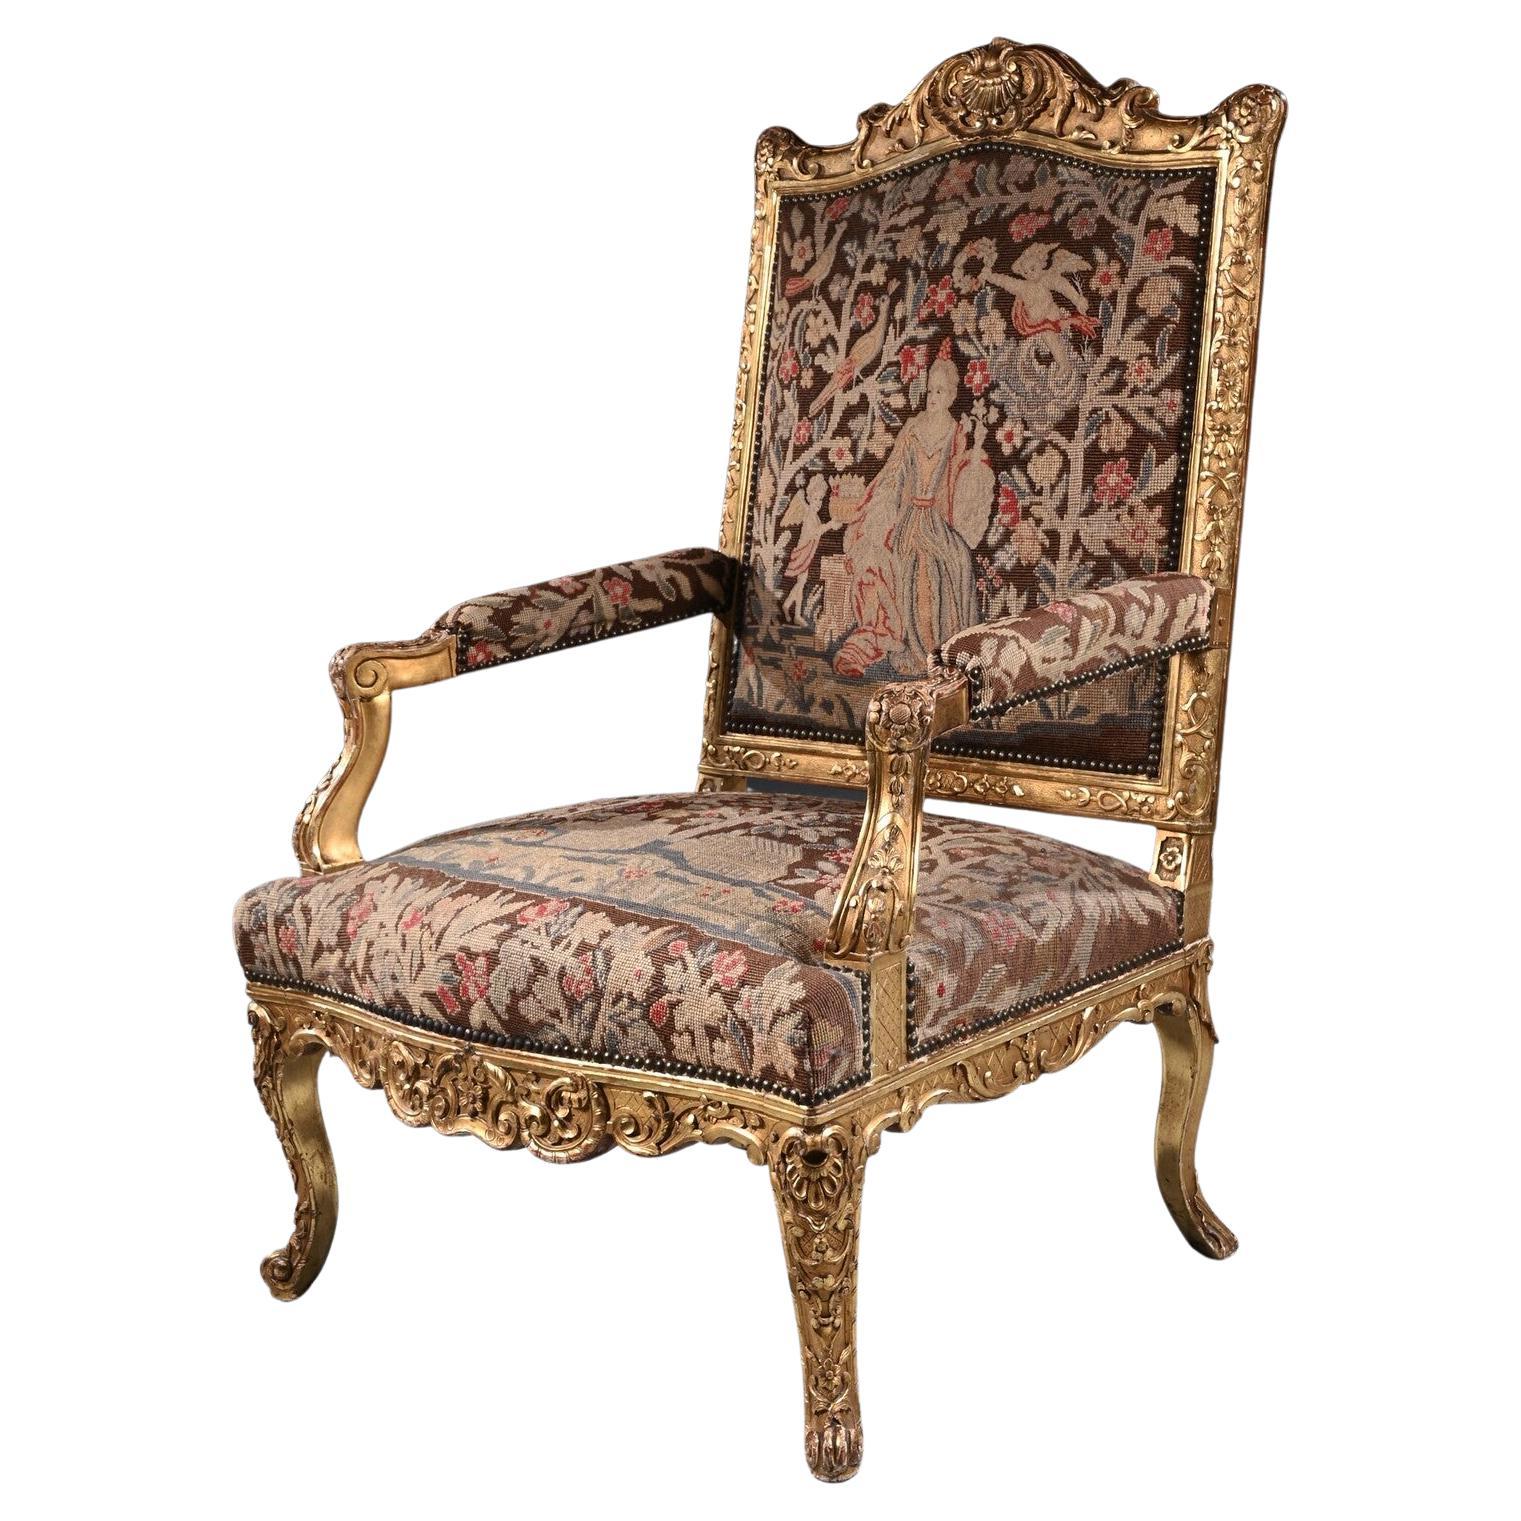 Fine 18th Century French Regence Period Giltwood Armchair Fauteuil